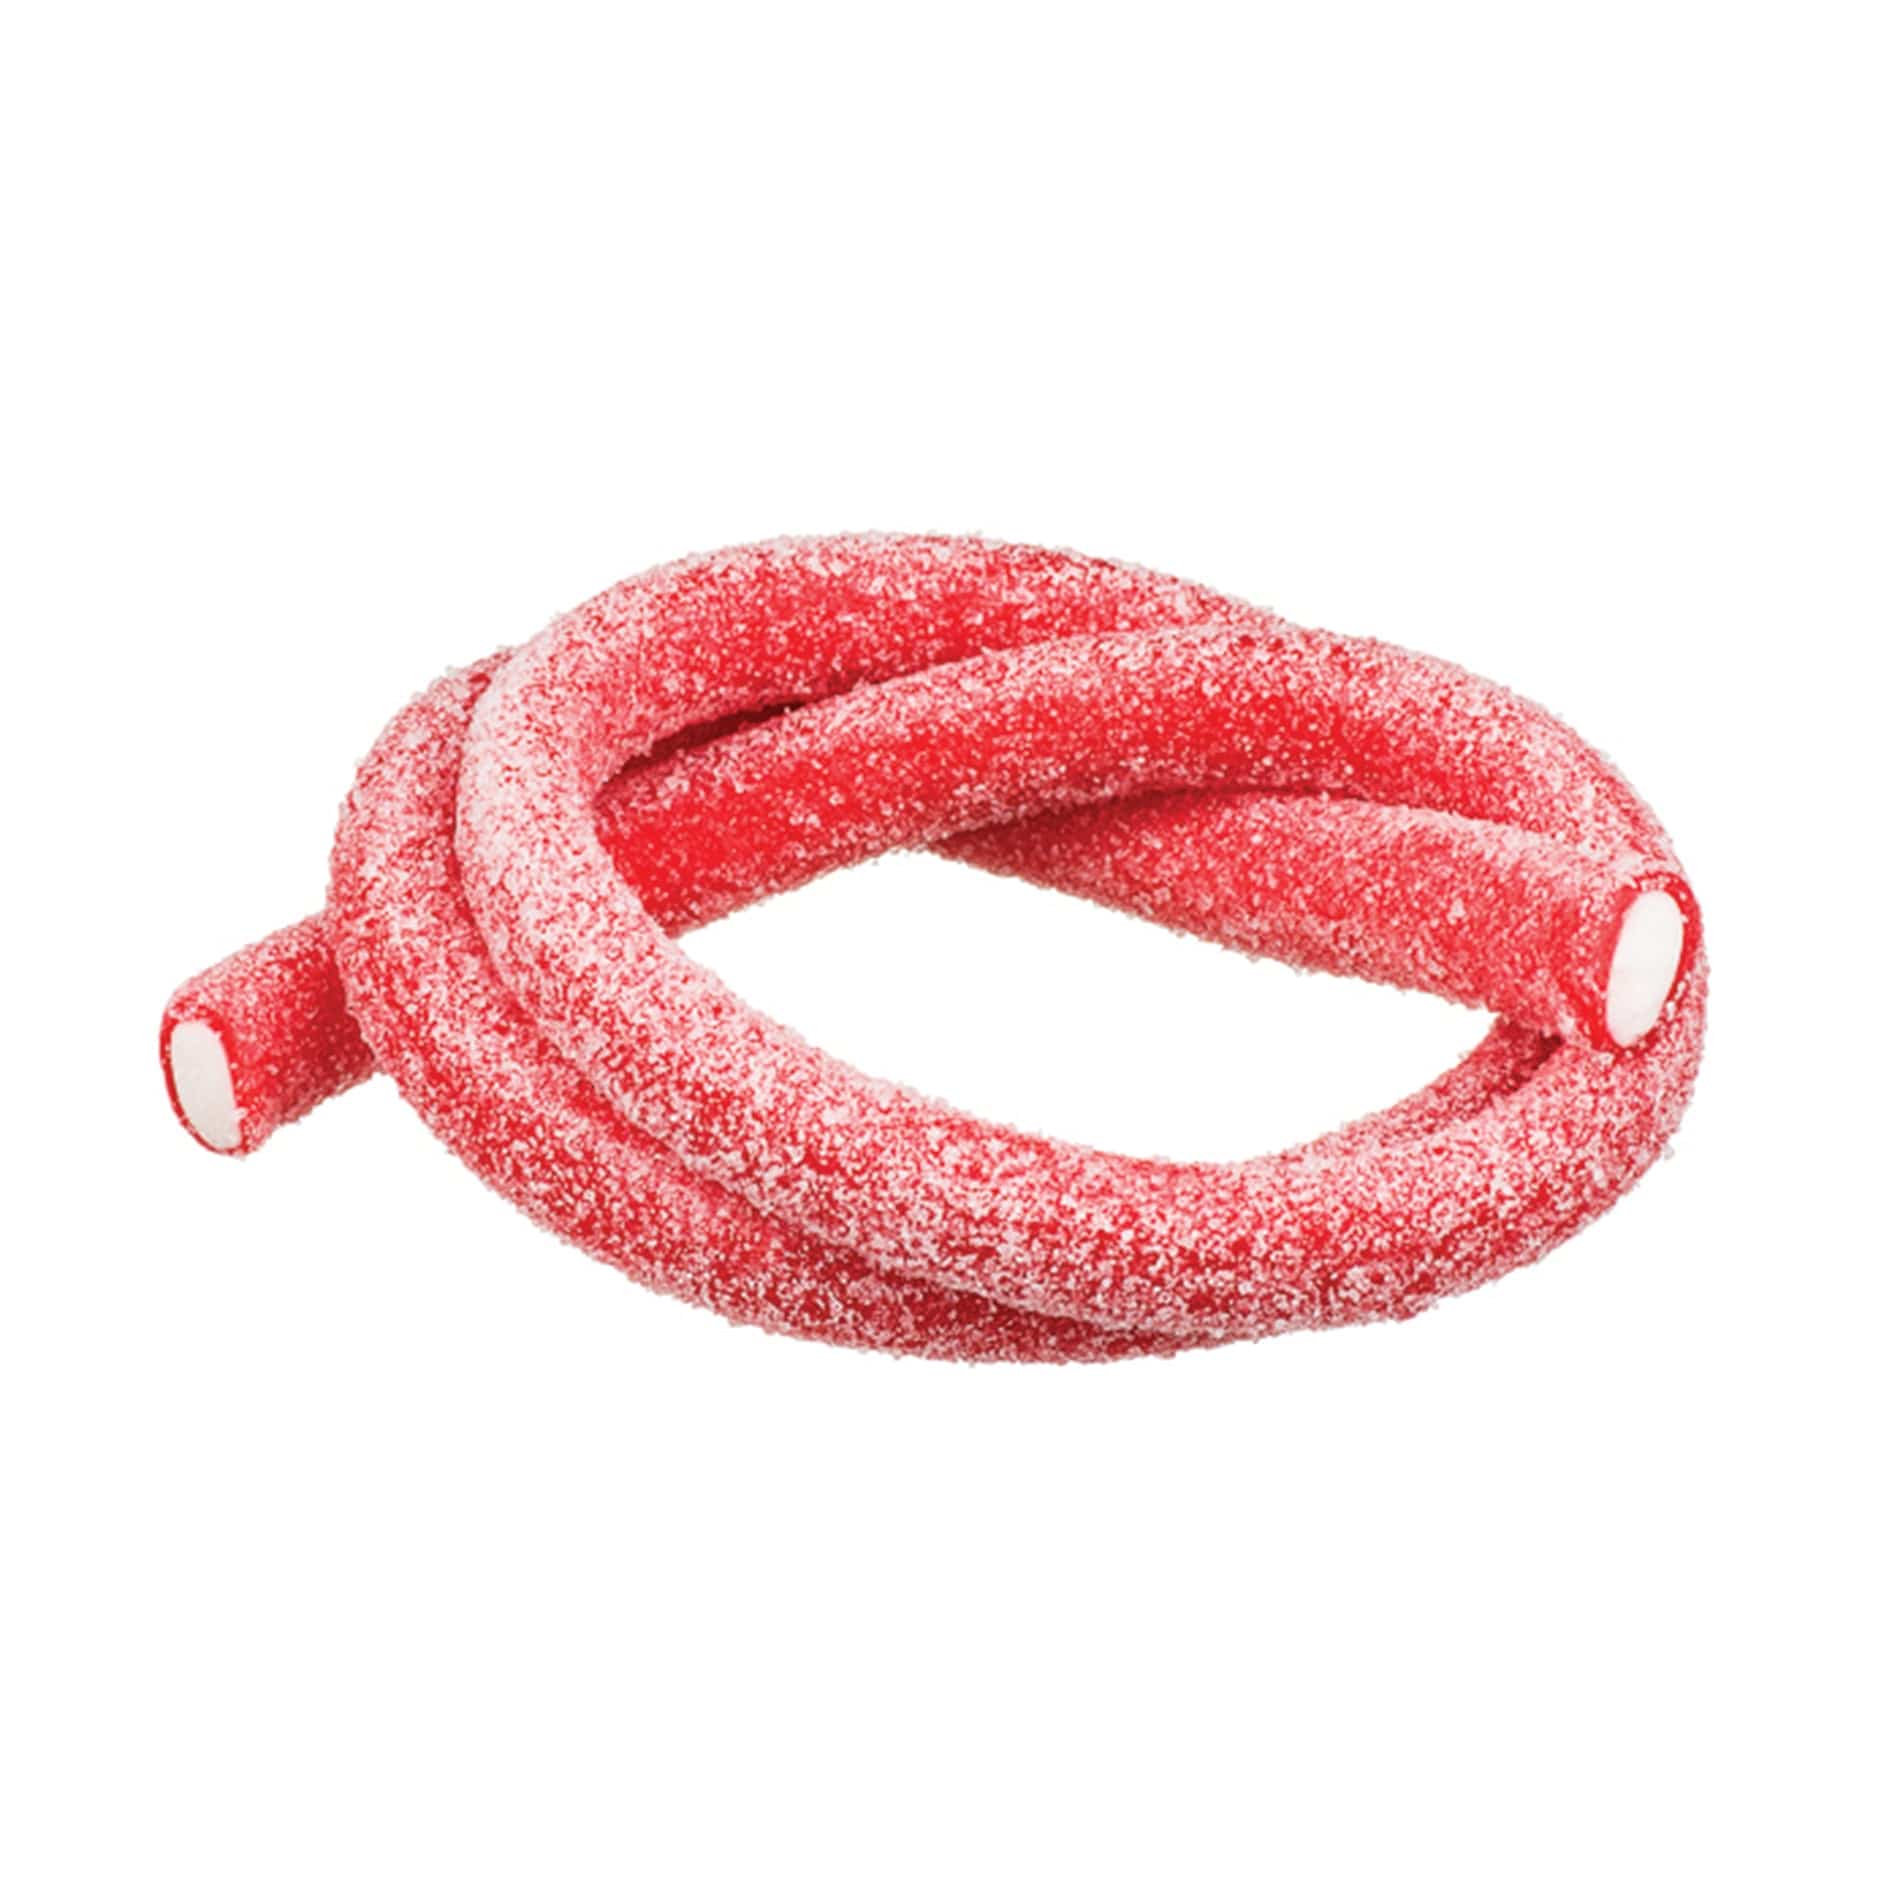 Meeega Cables Gummy Rope SOUR STRAWBERRY Copy of Meeega Cables European Chewy Rope Candy - Custom 12-Pack individually wrapped Meeega Cables, each over 2-feet long cups with lids and straws